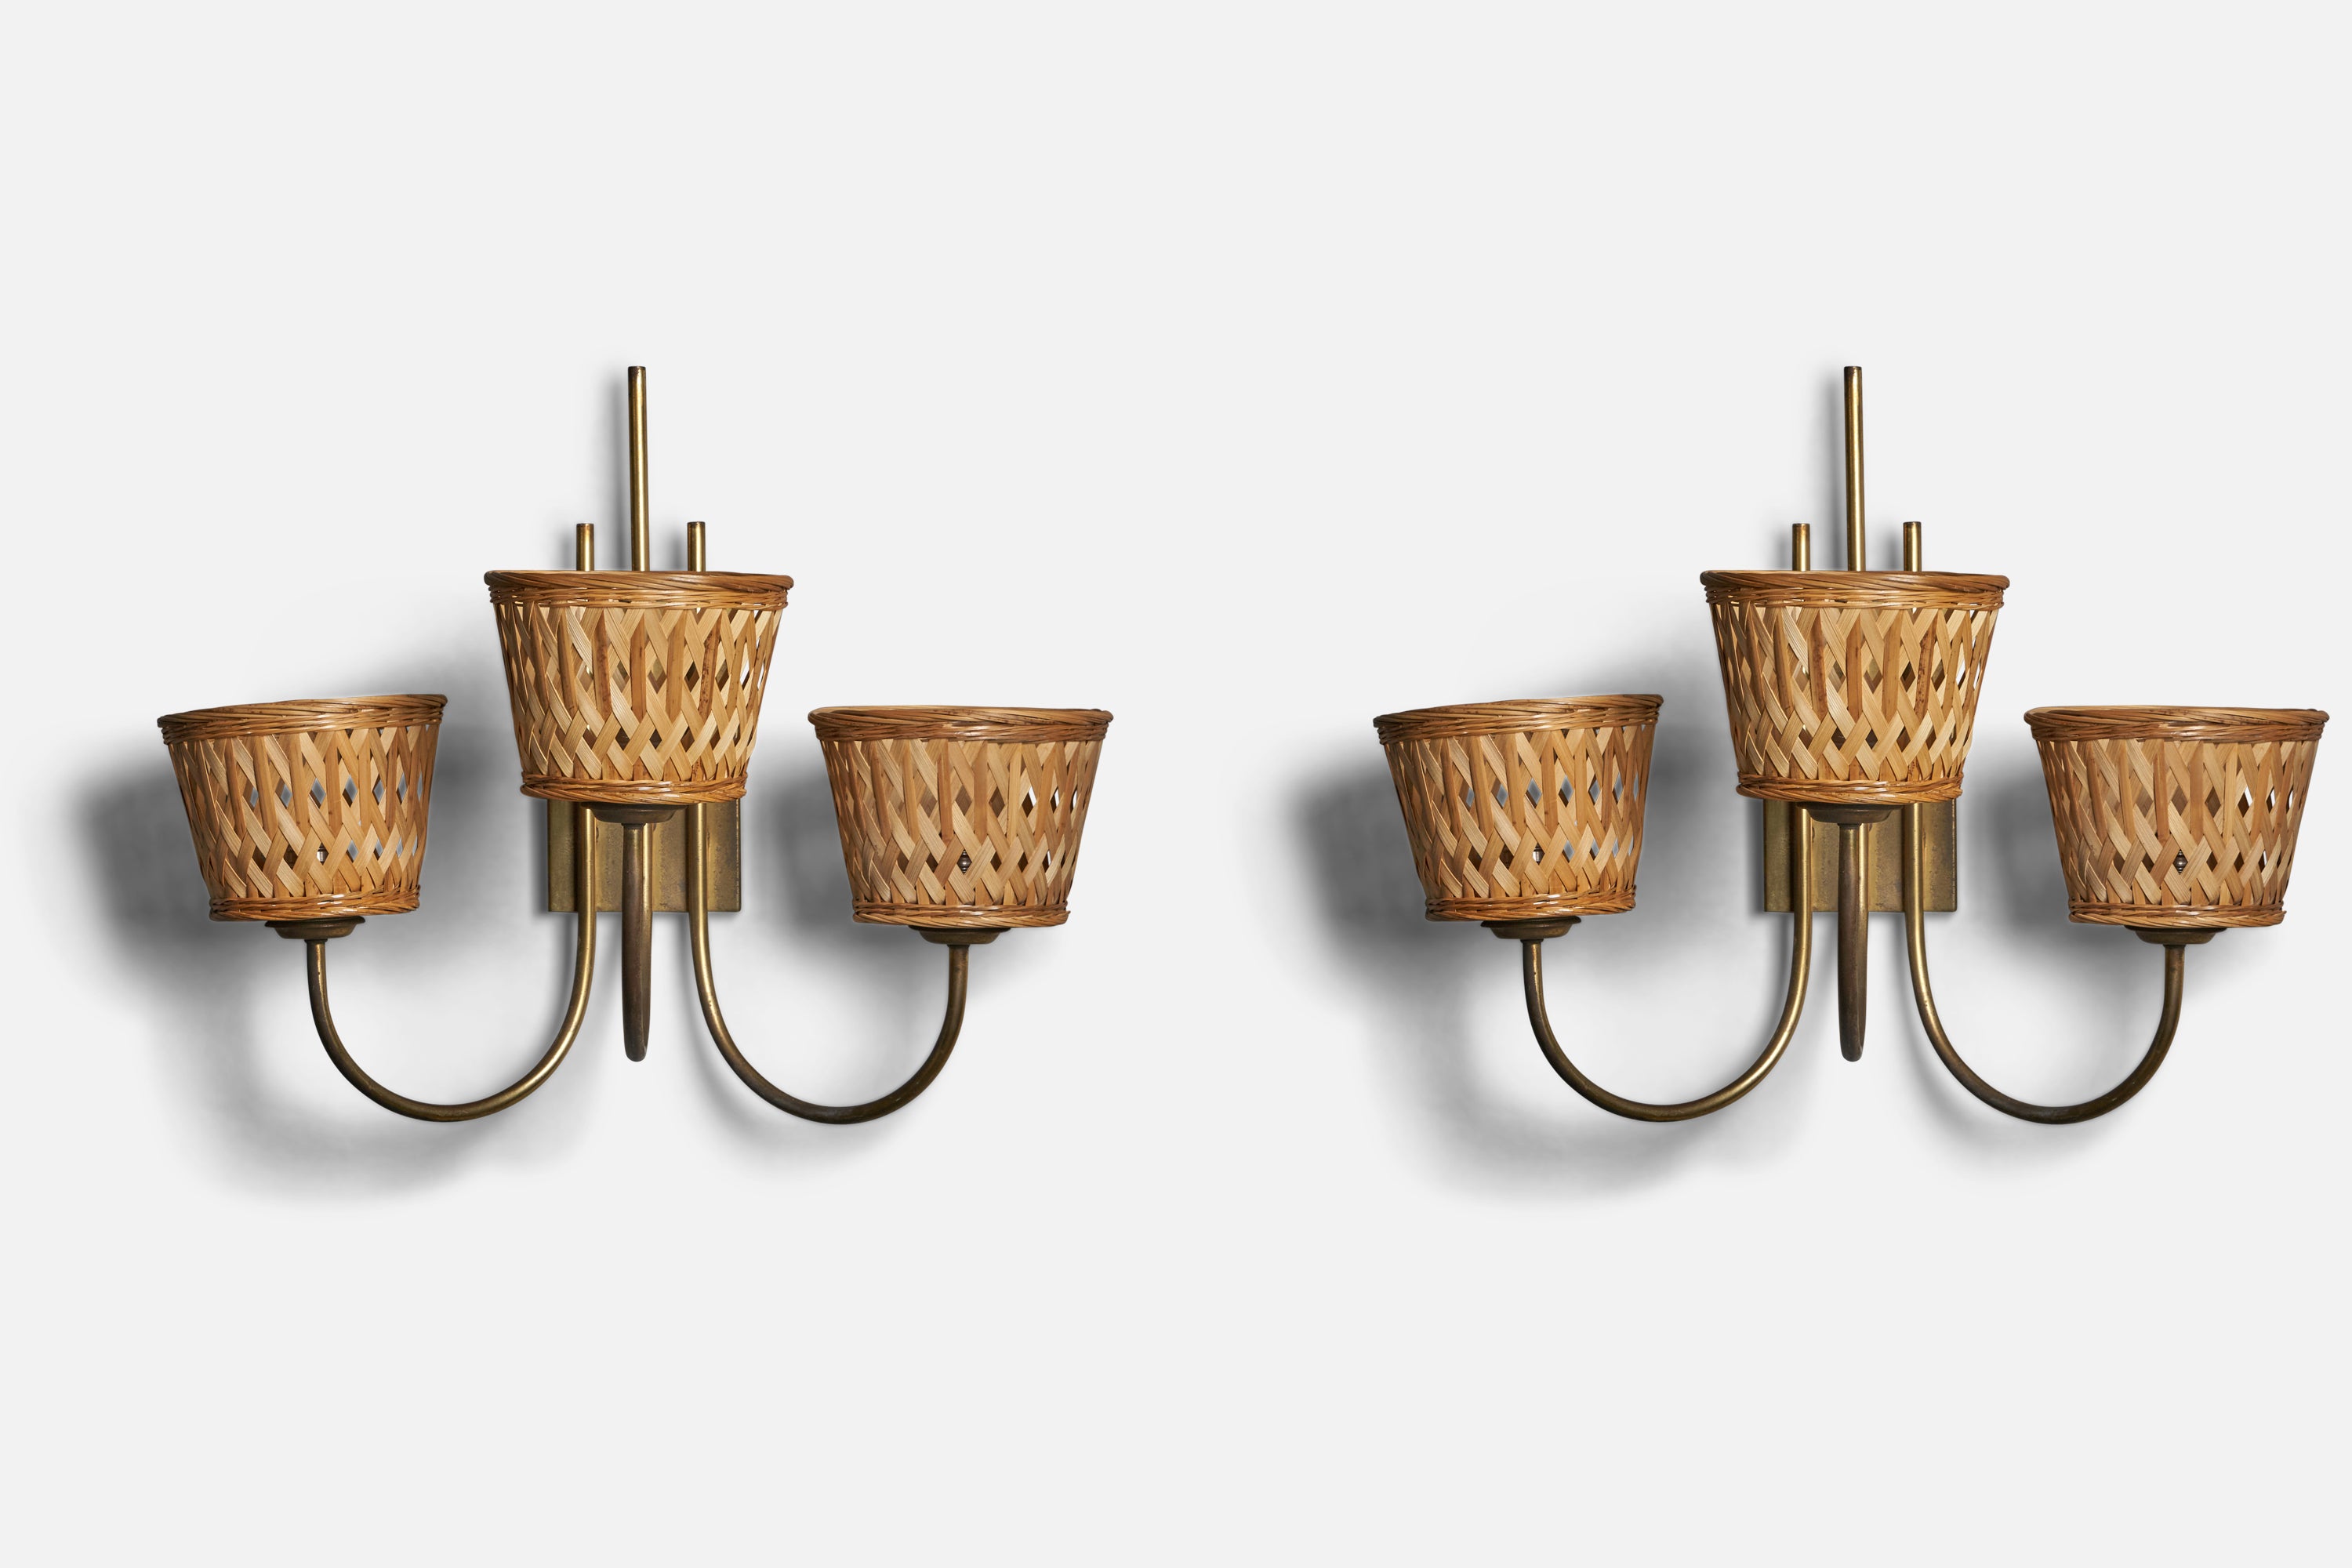 A pair of sizeable three armed brass and rattan wall lights, designed and produced in Italy, 1940s.

Overall Dimensions (inches): 19